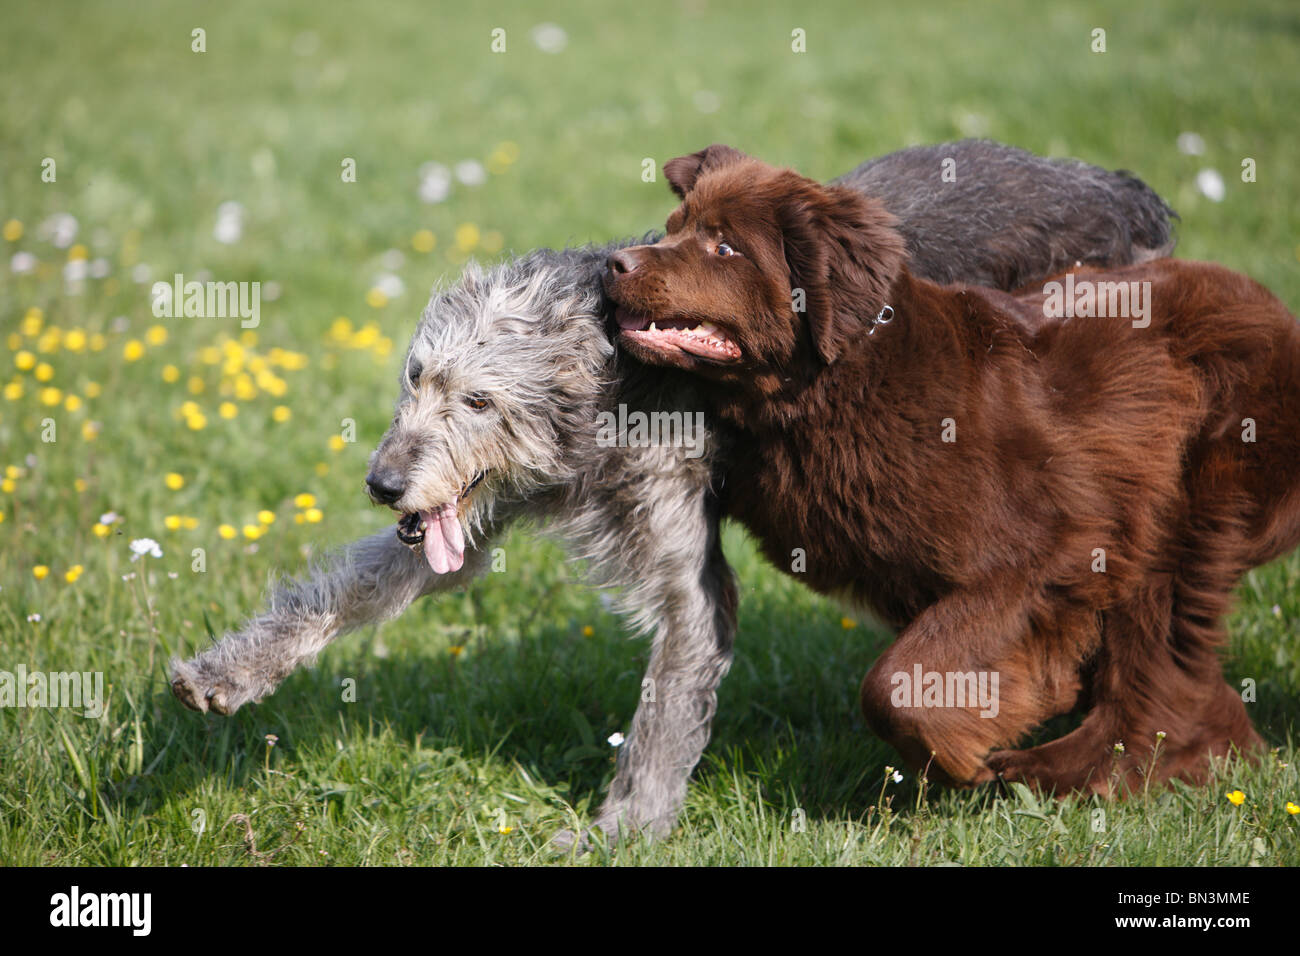 Newfoundland (Canis lupus f. familiaris), Irish Wolfhound romping in a meadow Stock Photo